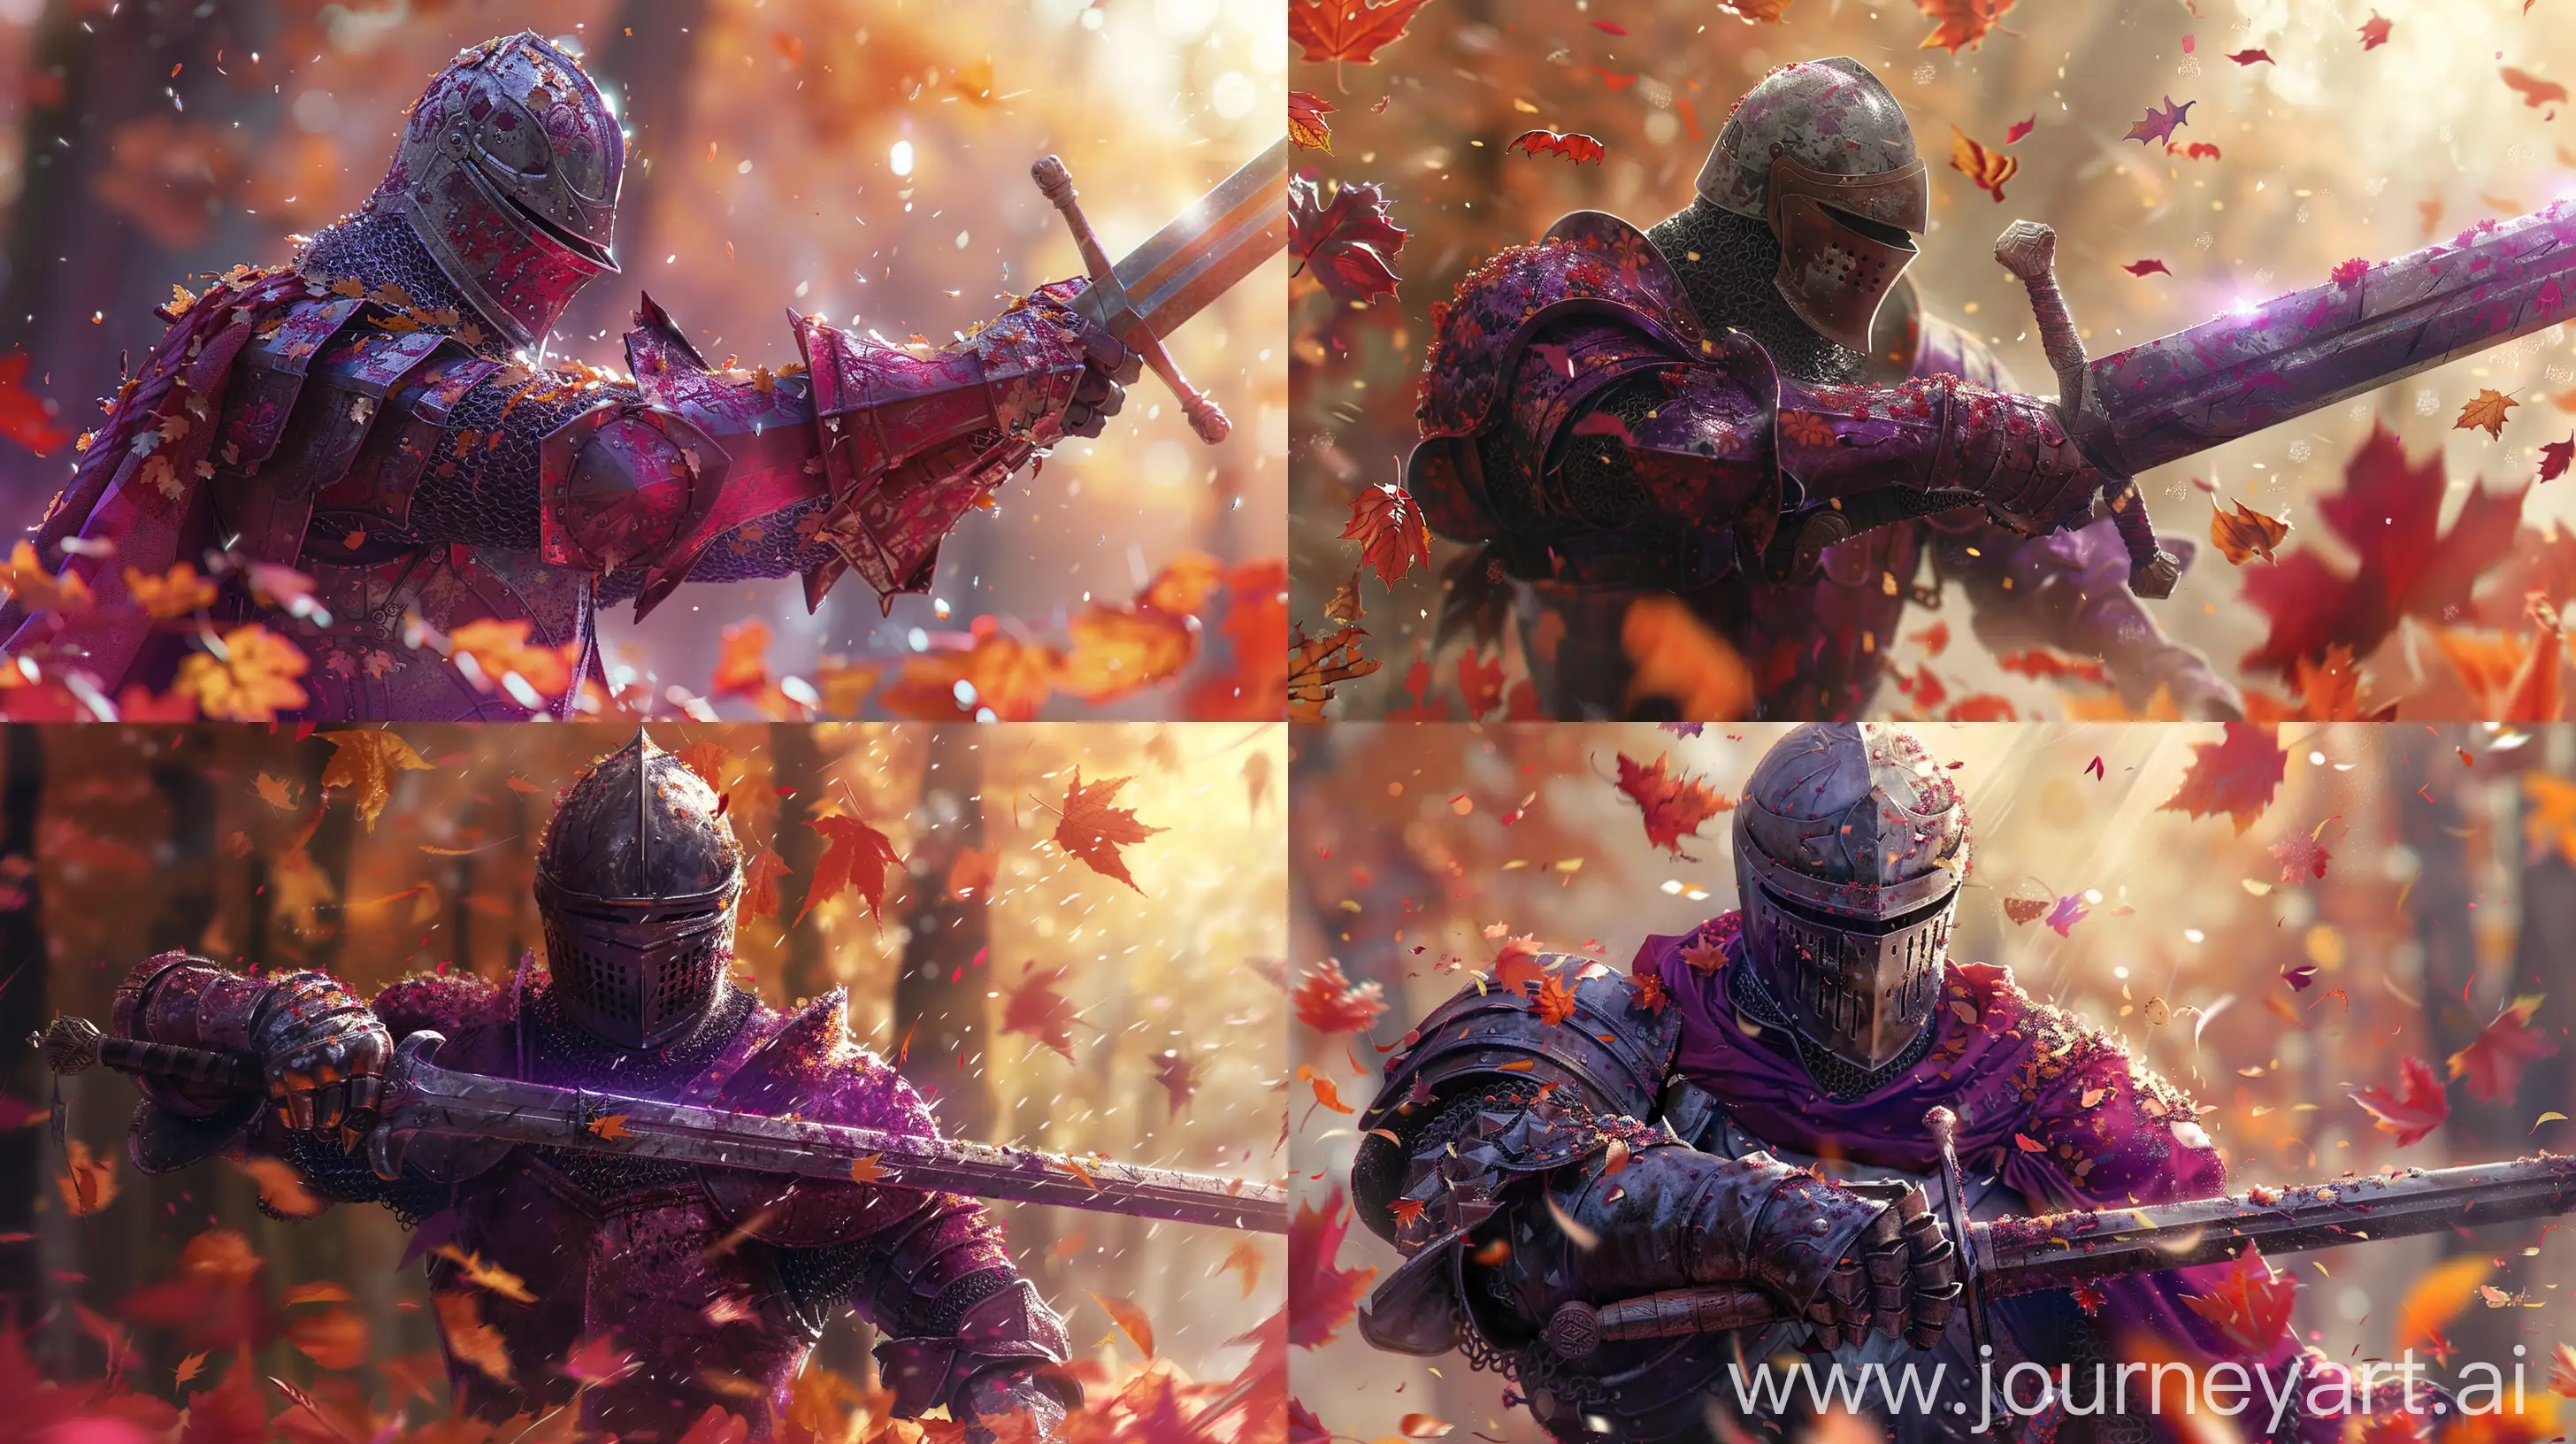 Medieval-Knight-with-OneHanded-Sword-in-Detailed-Red-and-Purple-Armor-Amid-Falling-Autumn-Leaves